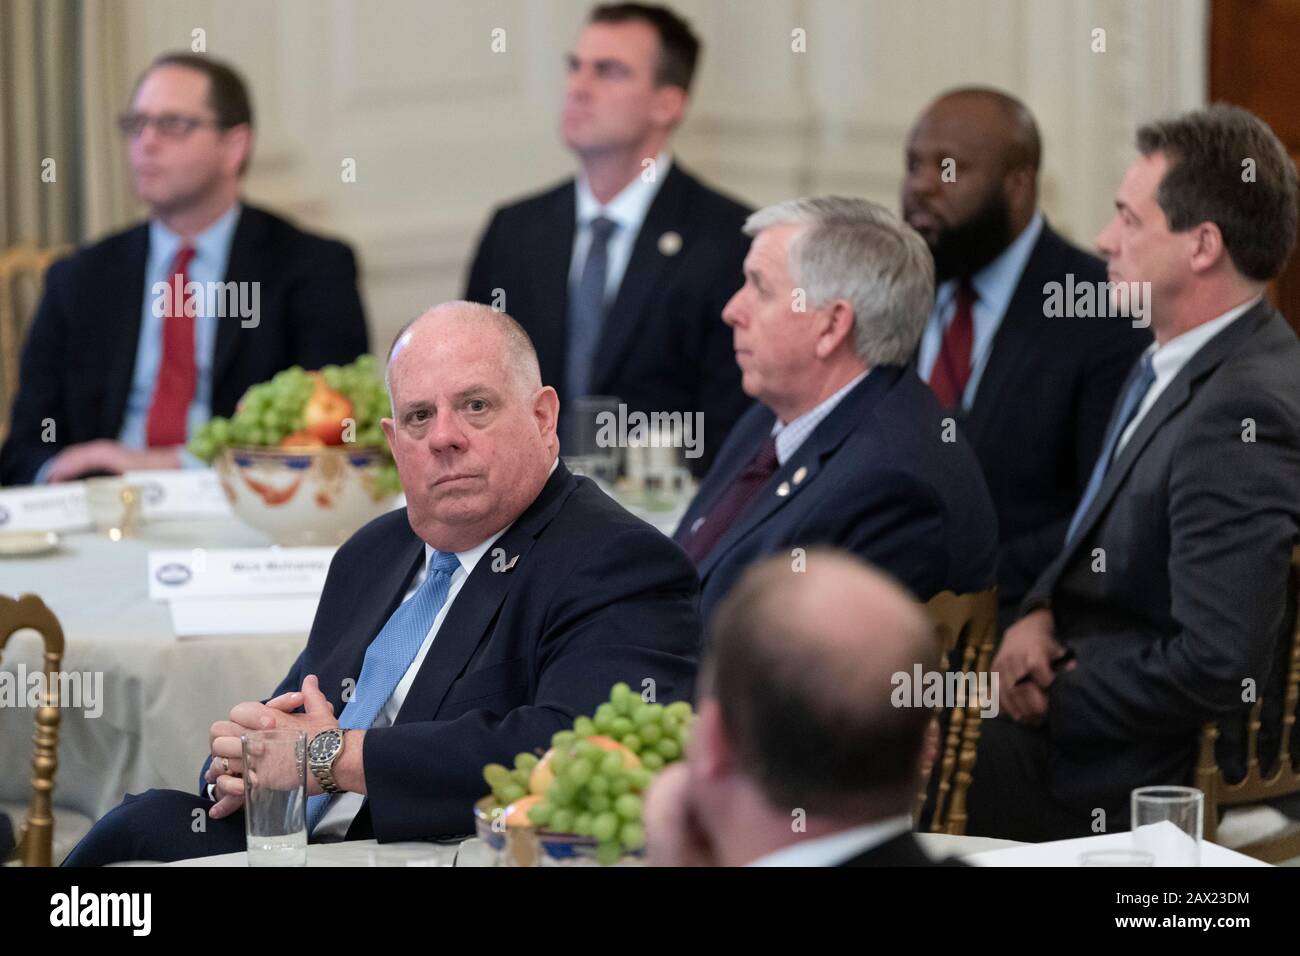 Maryland's Governor Larry Hogan(R) listens as United States President Donald J. Trump makes remarks at the White House Business Session with governors at the White House in Washington, DC during the National Governor's Association meetings. Credit: Chris Kleponis/Pool via CNP /MediaPunch Stock Photo